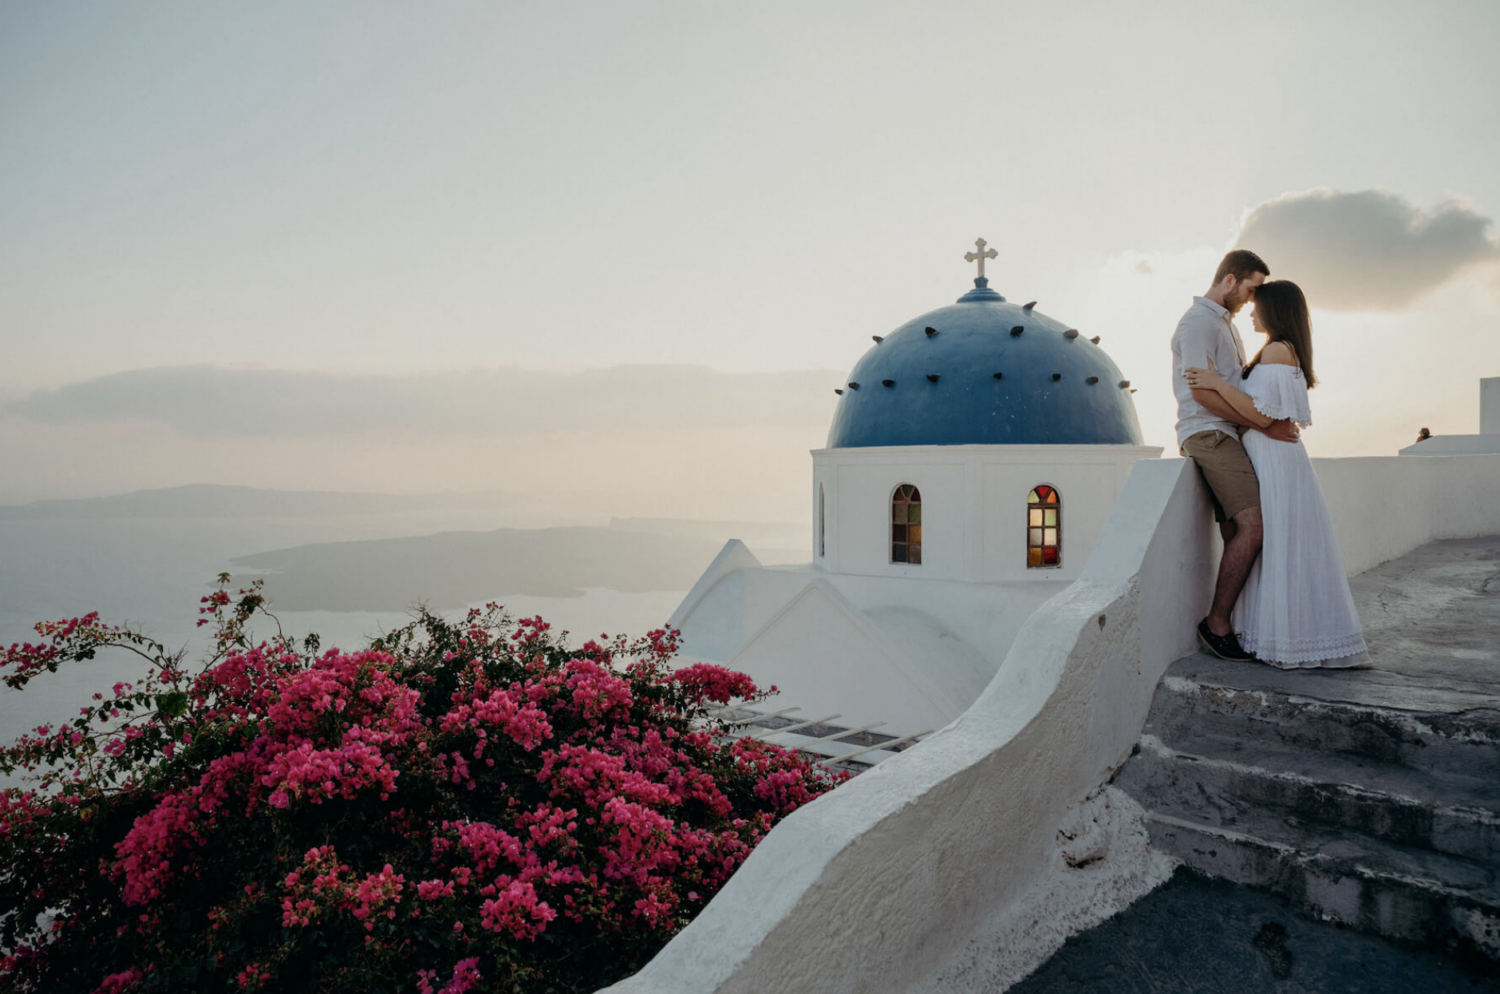 Newlyweds Guide to Planning the Perfect Honeymoon